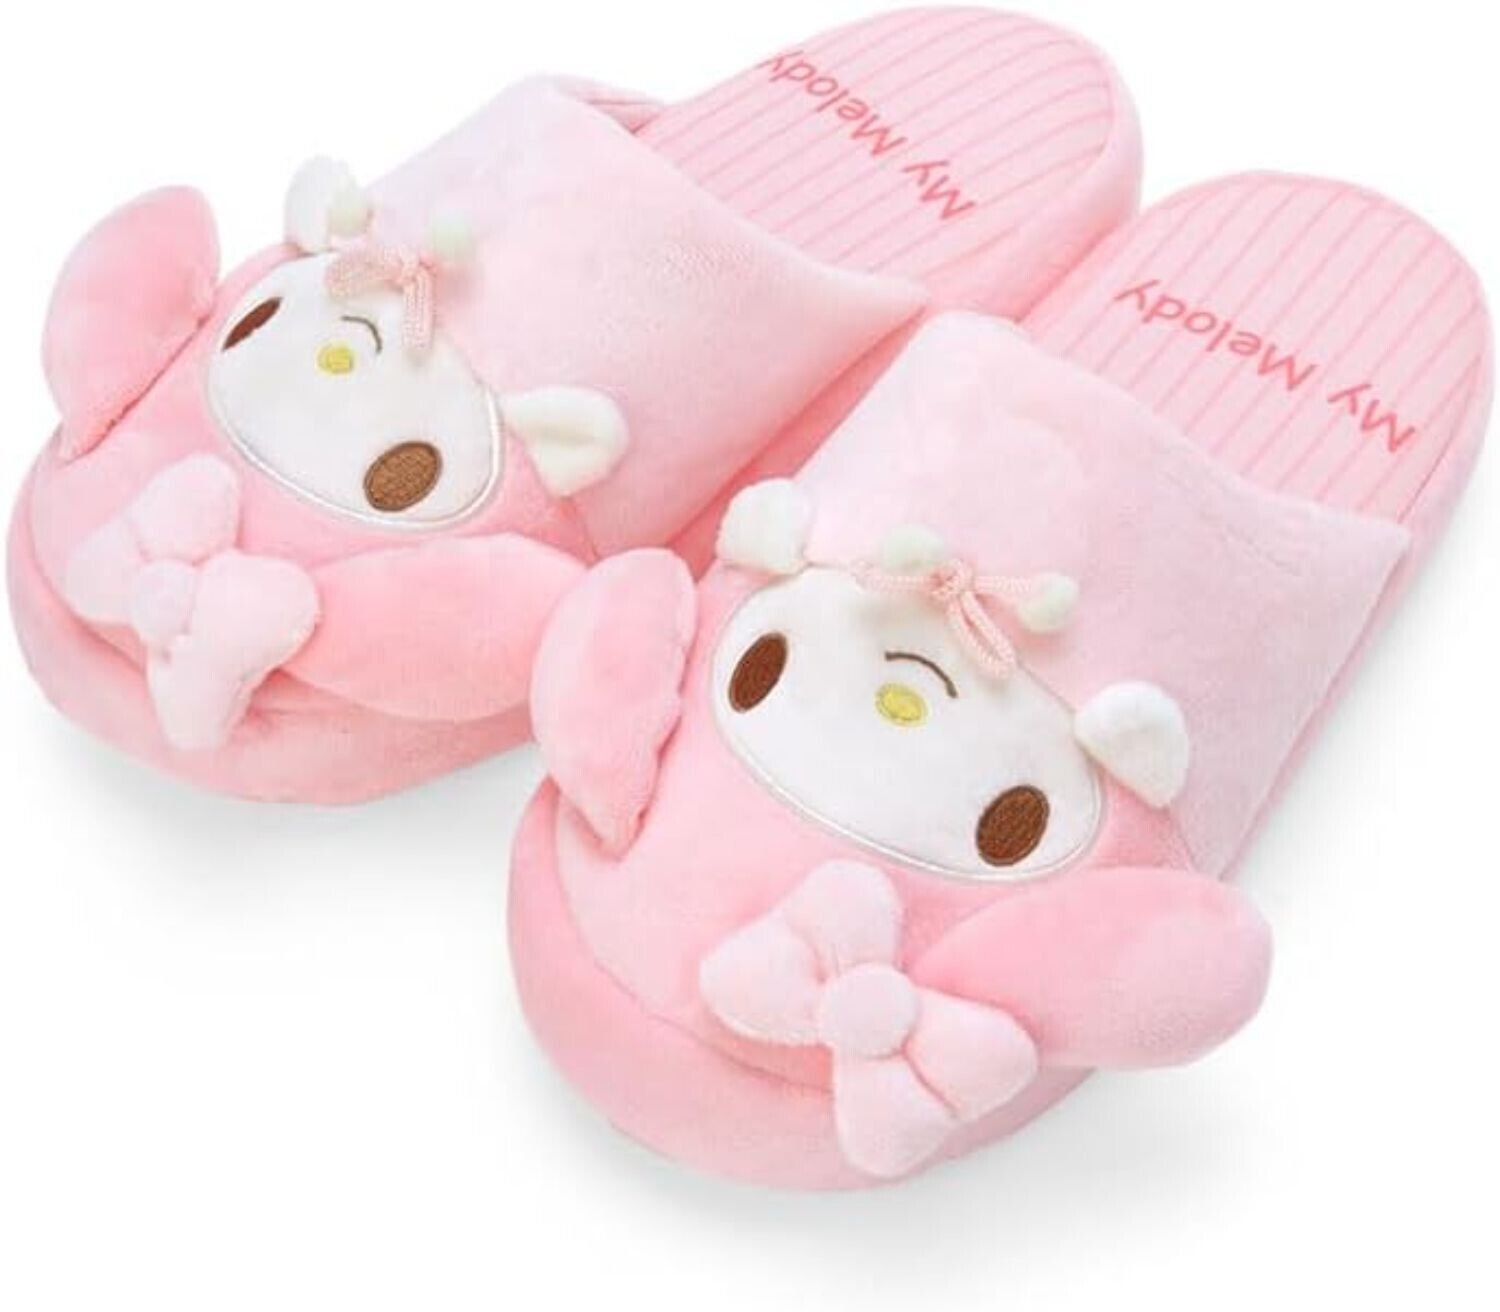 Sanrio Character My Melody Character Shaped Slippers Warm Item New Japan